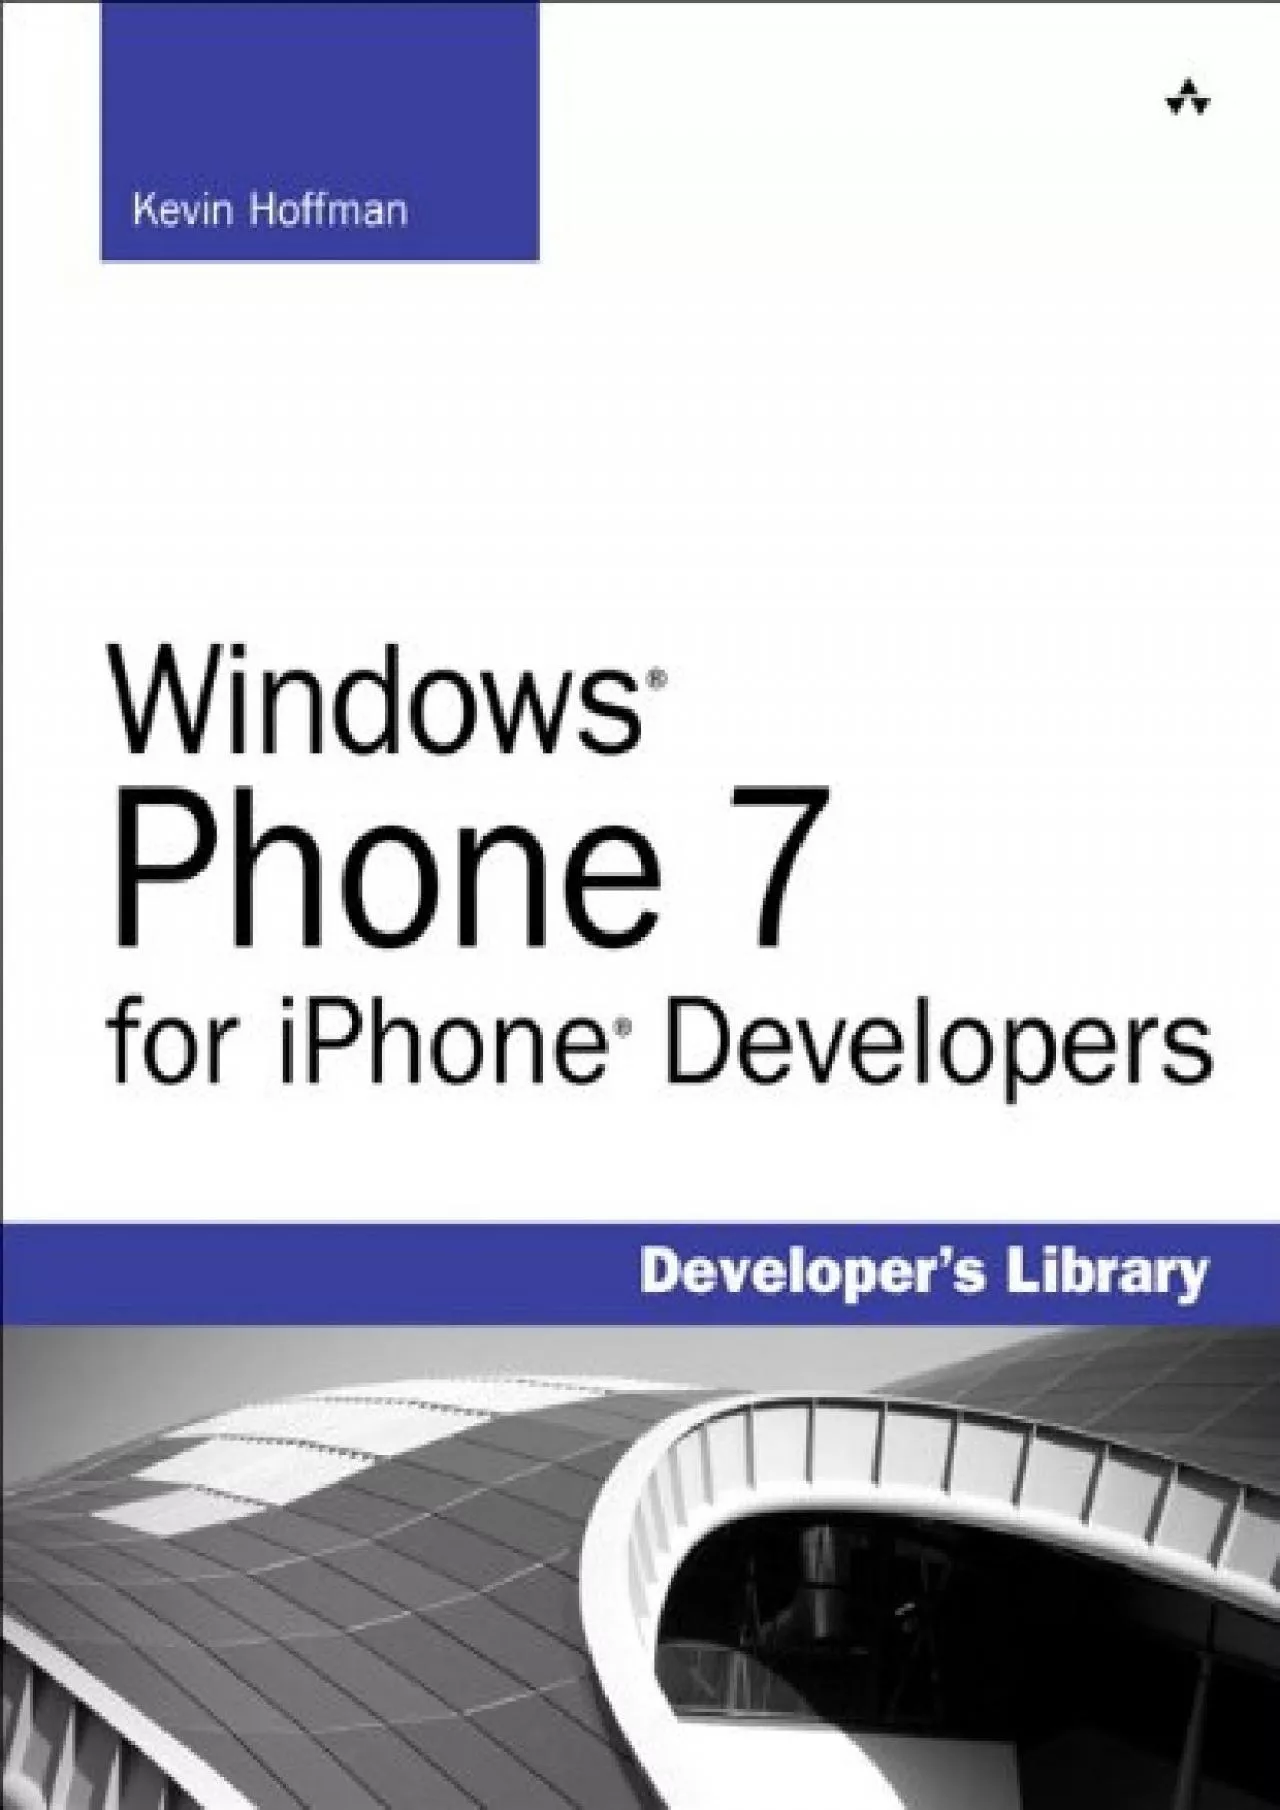 [READING BOOK]-Windows Phone 7 for iPhone Developers (Developer\'s Library)